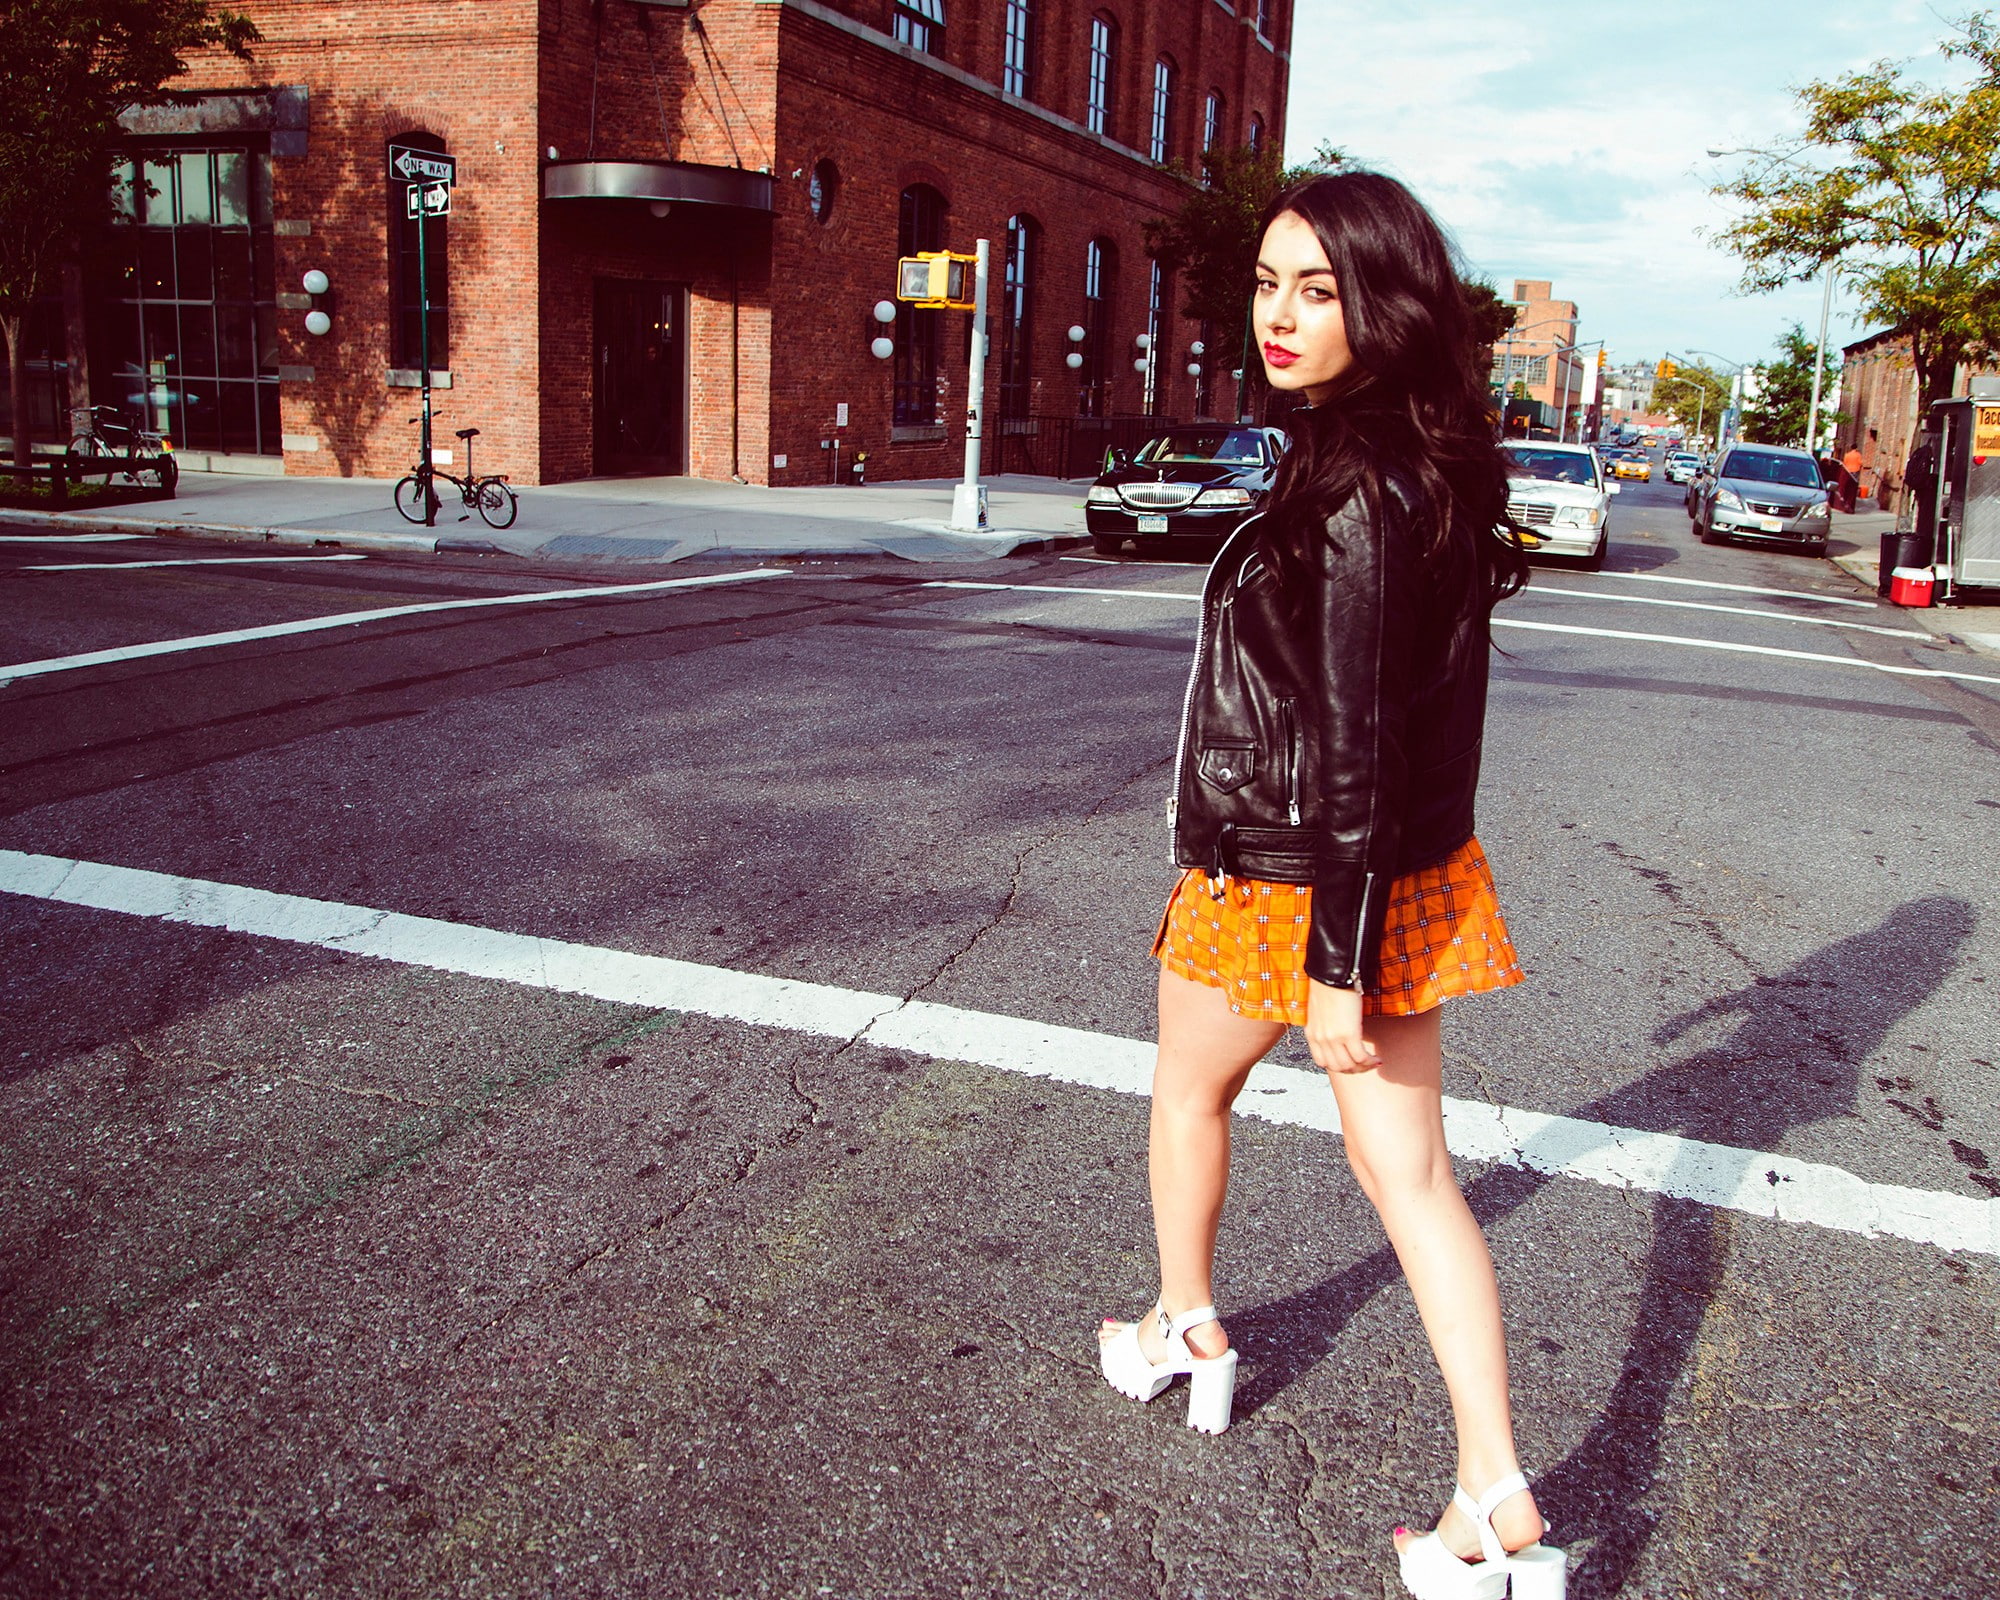 Charli XCX, singer, women, one person, city, full length, real people